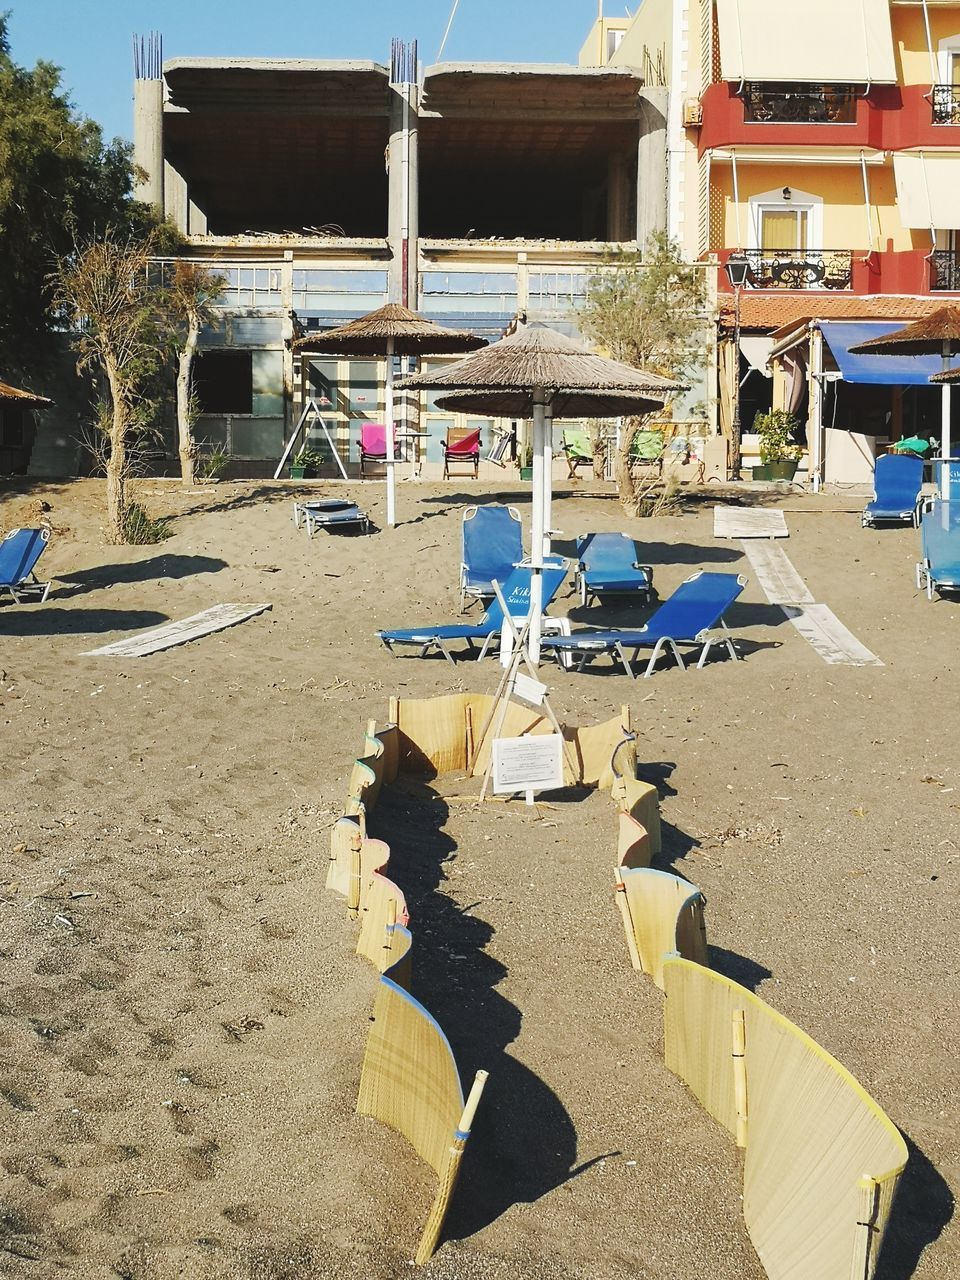 CHAIRS ON BEACH BY BUILDINGS